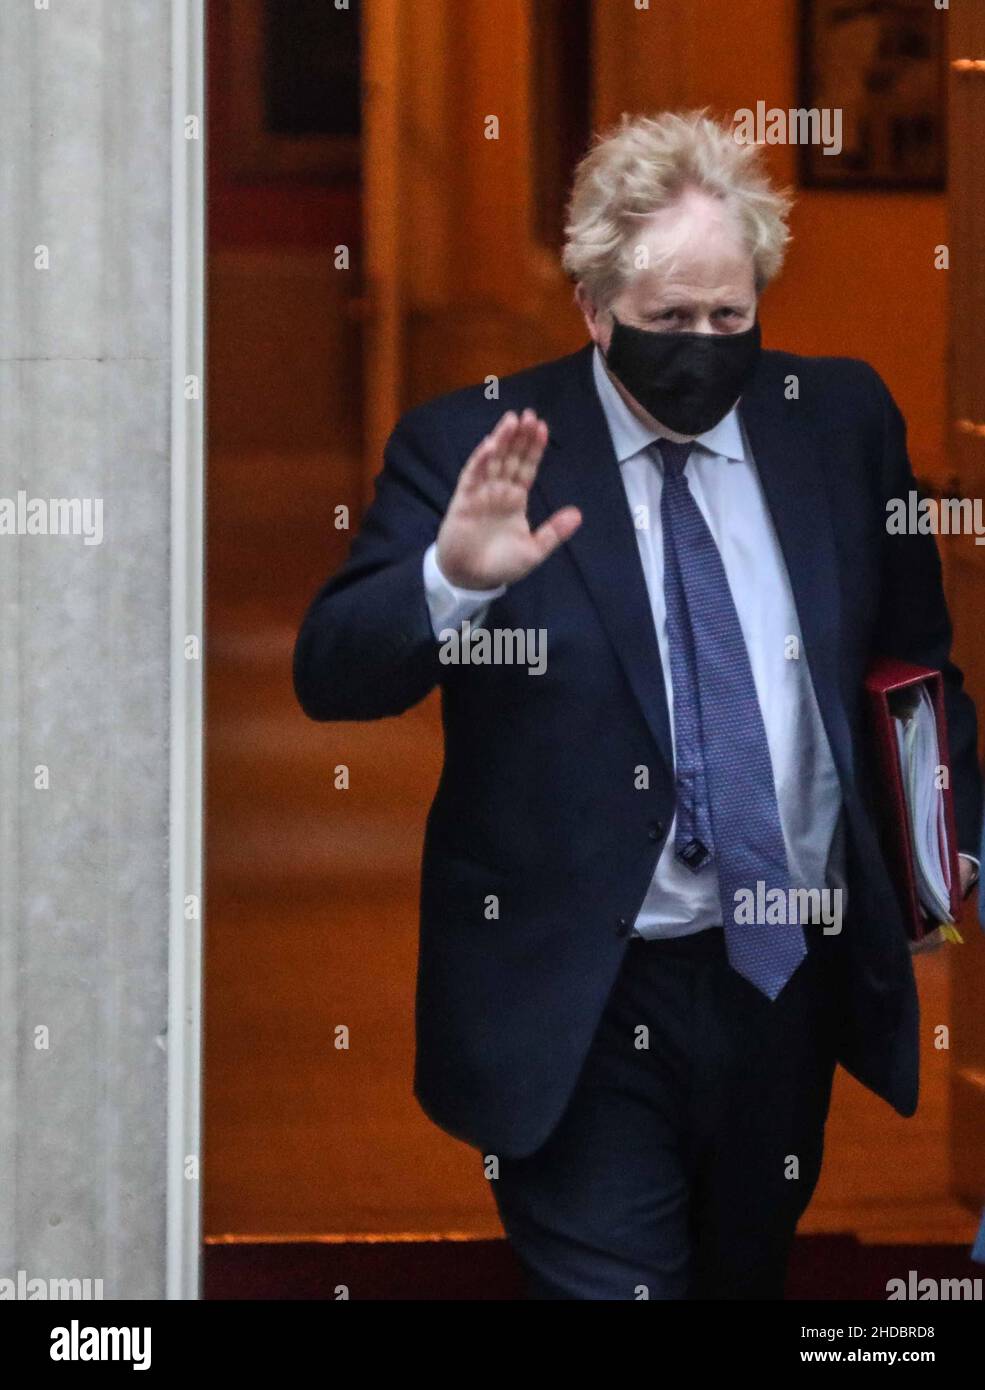 London UK 05 January 2022 Primer Minister Boris Johnson leaving 10 Downing Street  to attend his first PMQ's of 2022,with Keir Starmer missing the PMQ's questions  after testing  positive for Covid leaving Deputy leader Angela  Rayner  to lead with the questions. Paul Quezada-Neiman/Alamy Live News Stock Photo